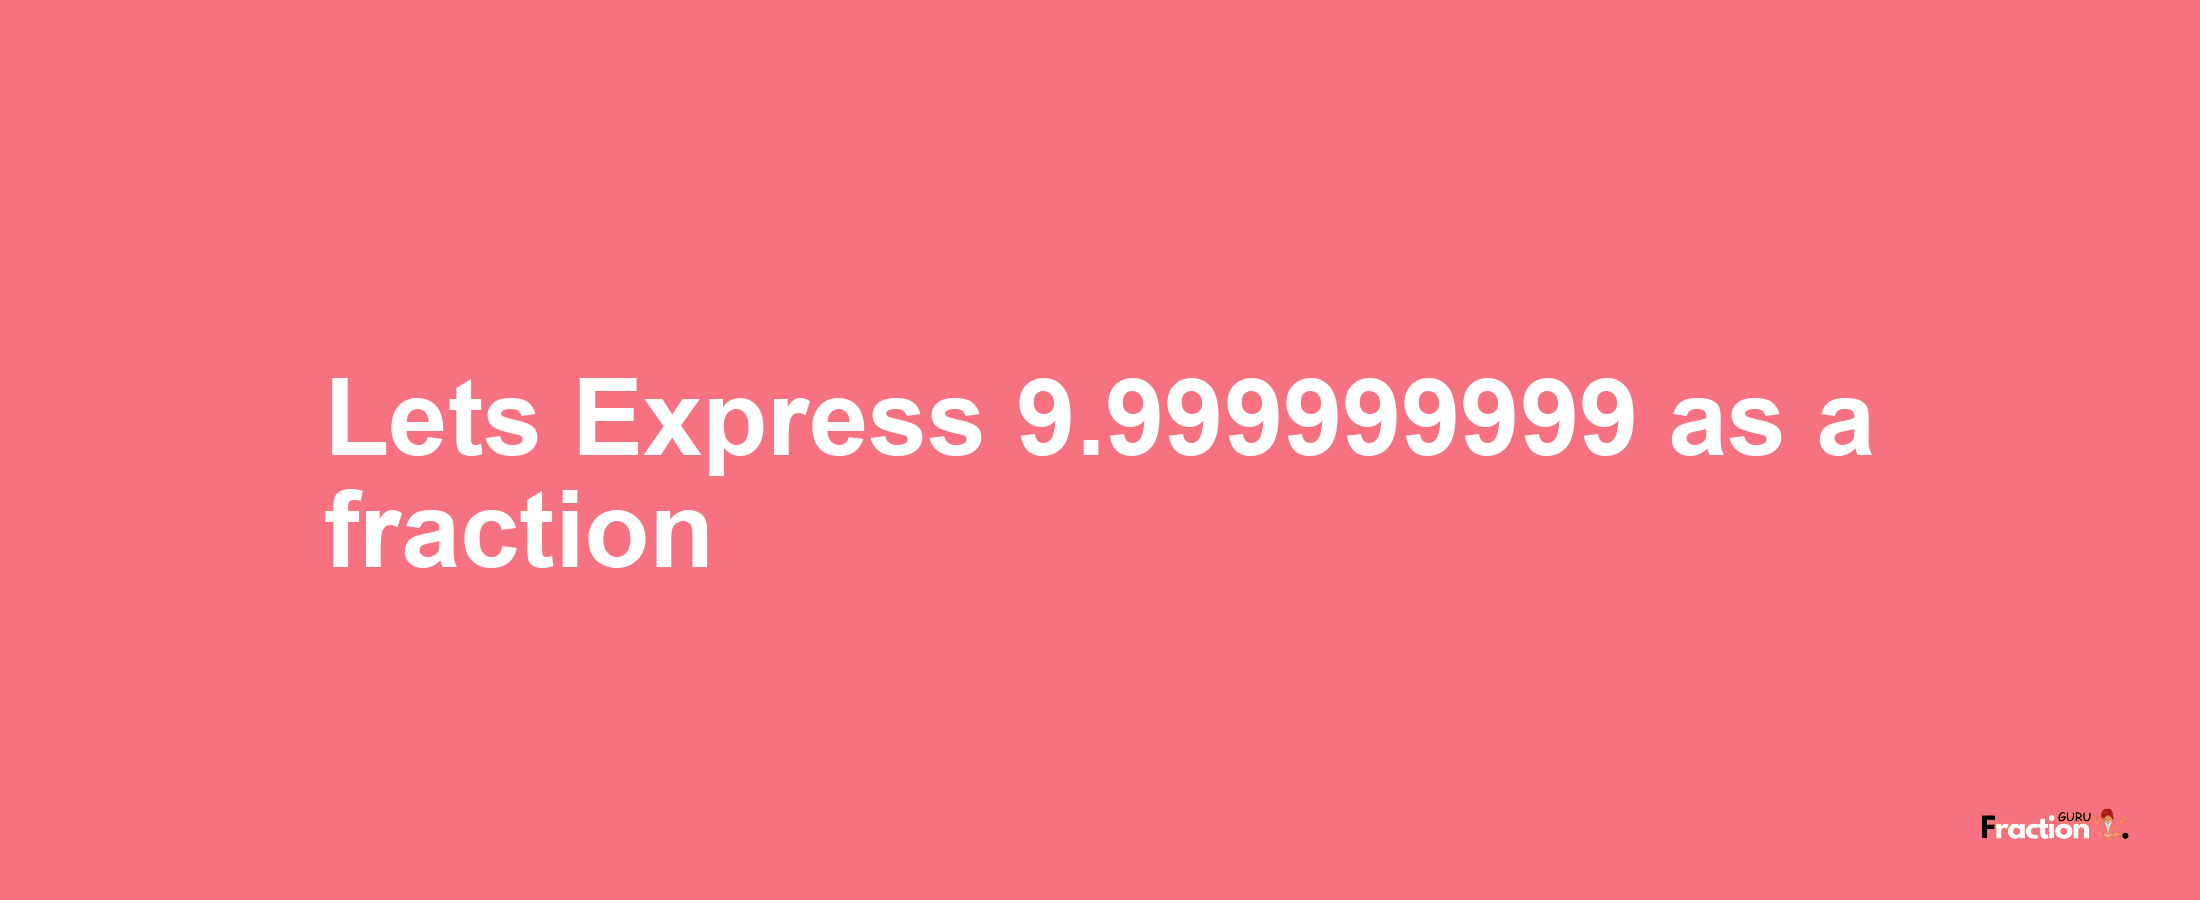 Lets Express 9.999999999 as afraction